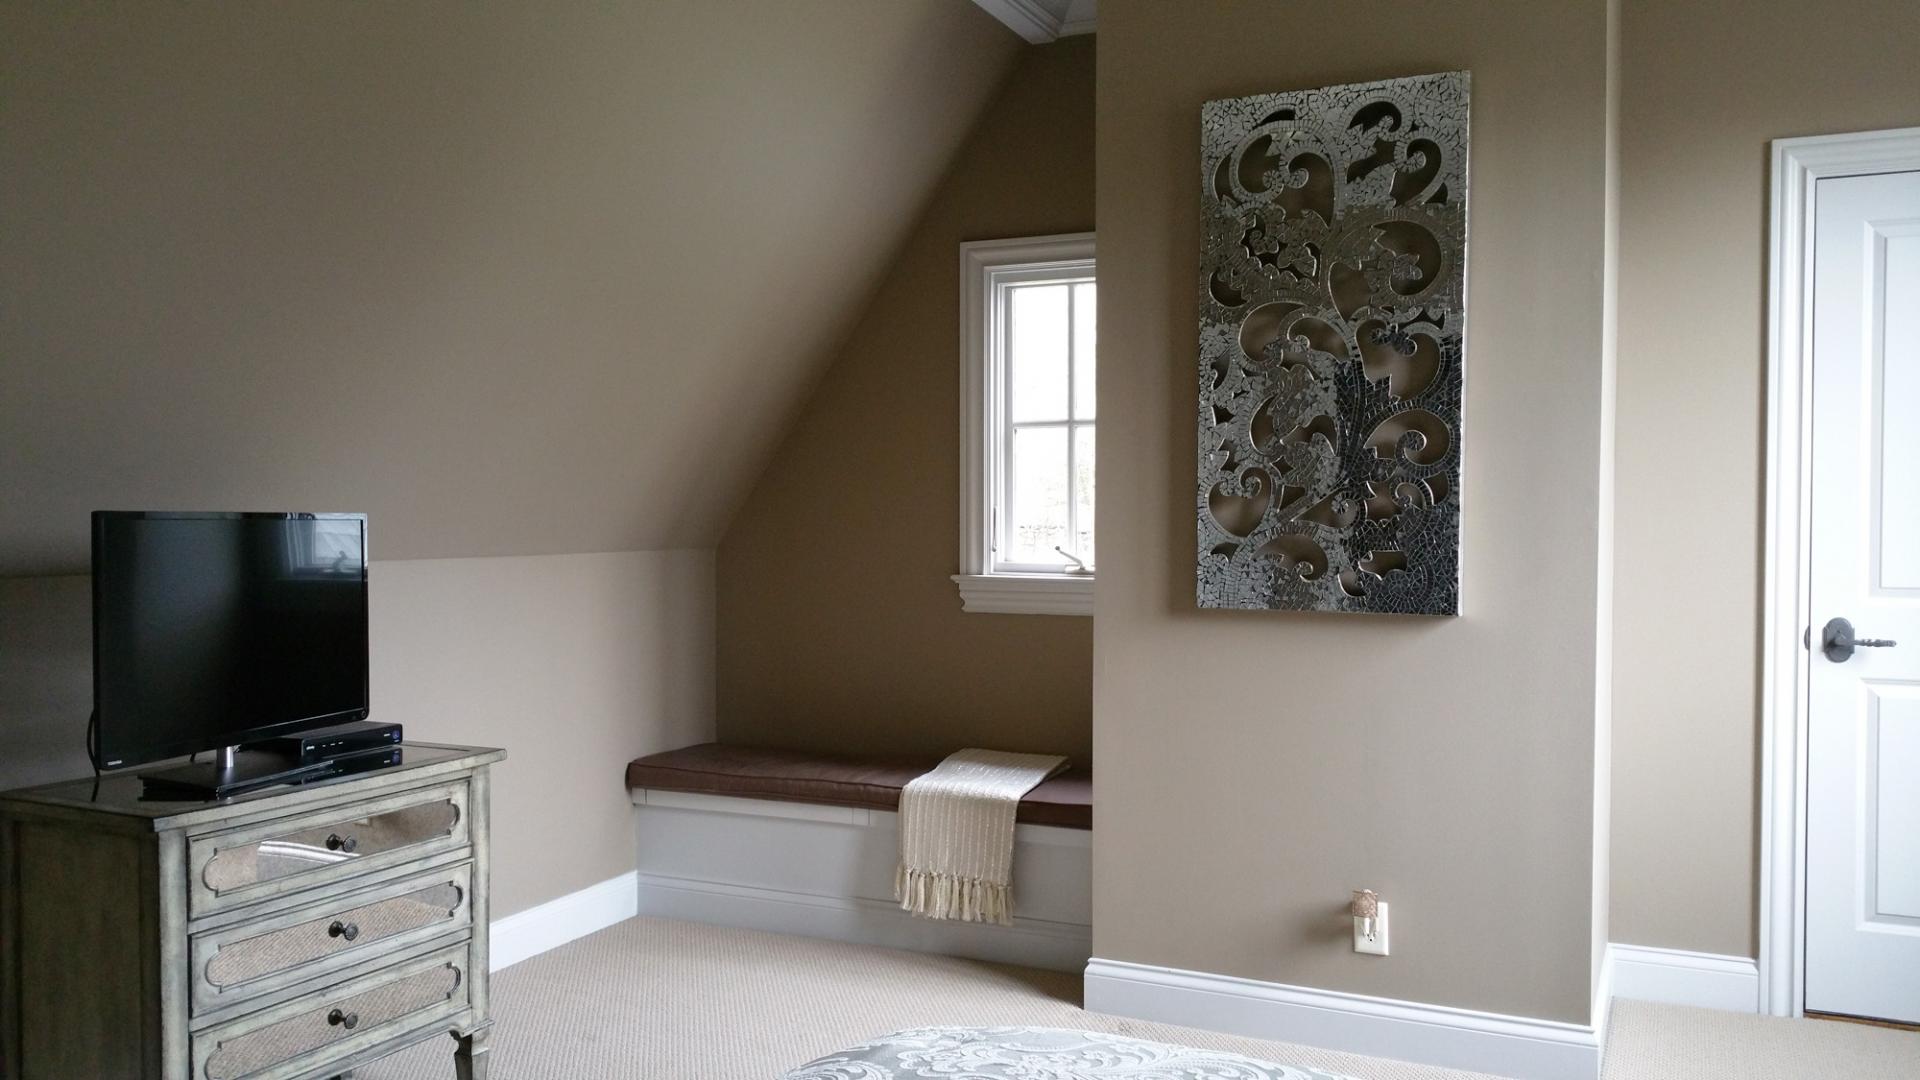 Beautiful custom colored walls in this inviting and soothing look of this Brentwood customer’s guest bedroom.